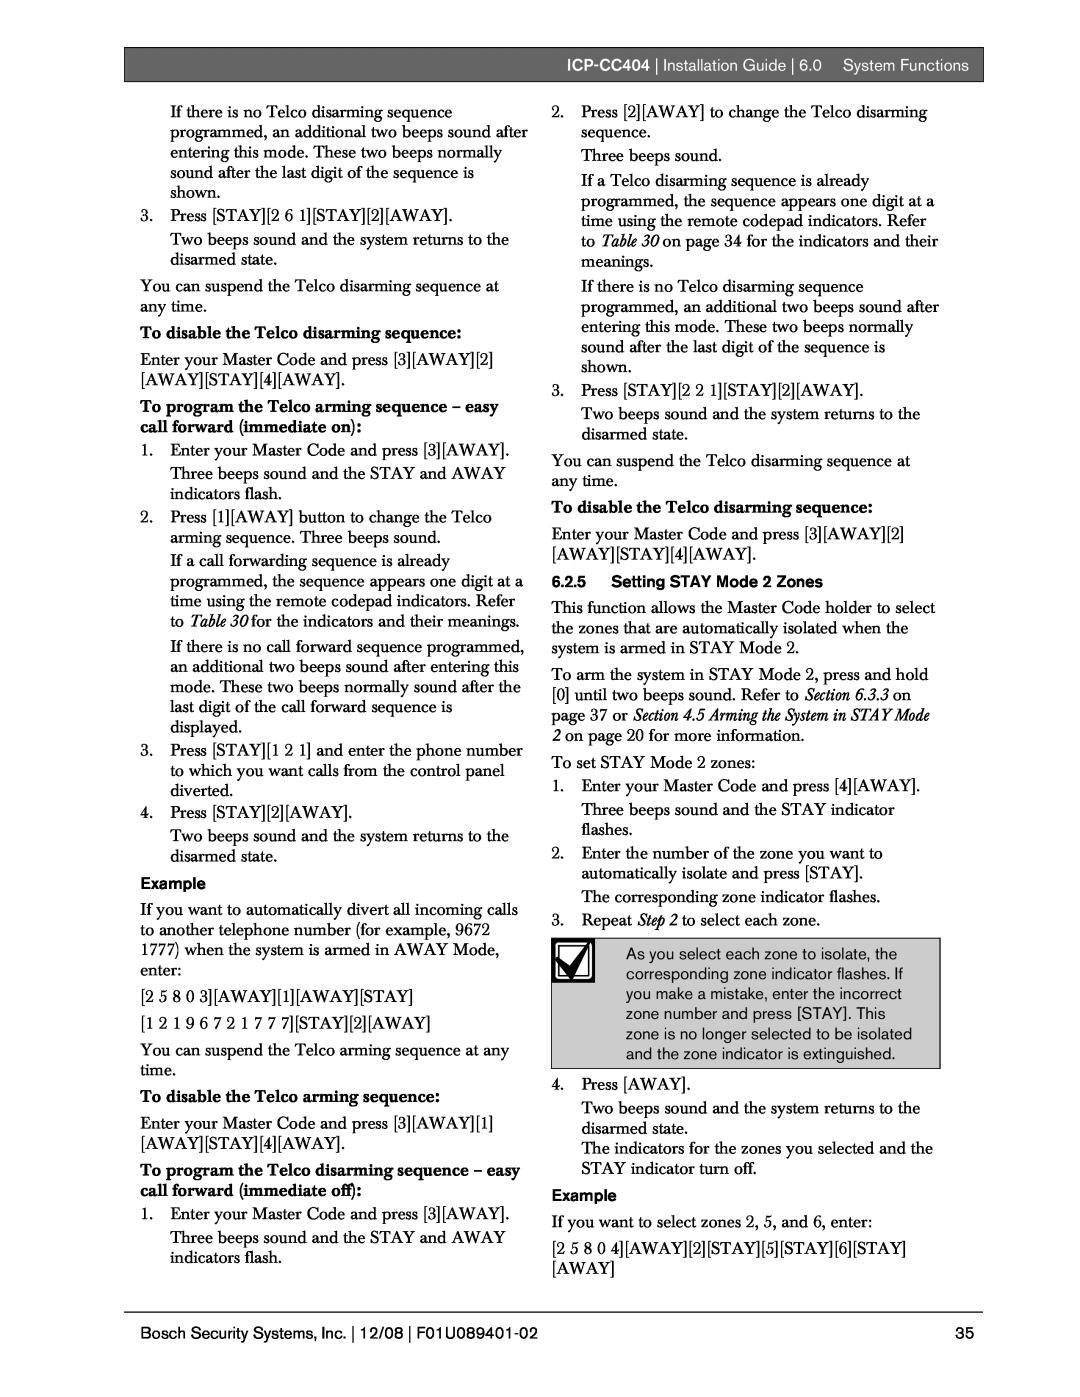 Bosch Appliances ICP-CC404 manual 6.2.5Setting STAY Mode 2 Zones, Example 